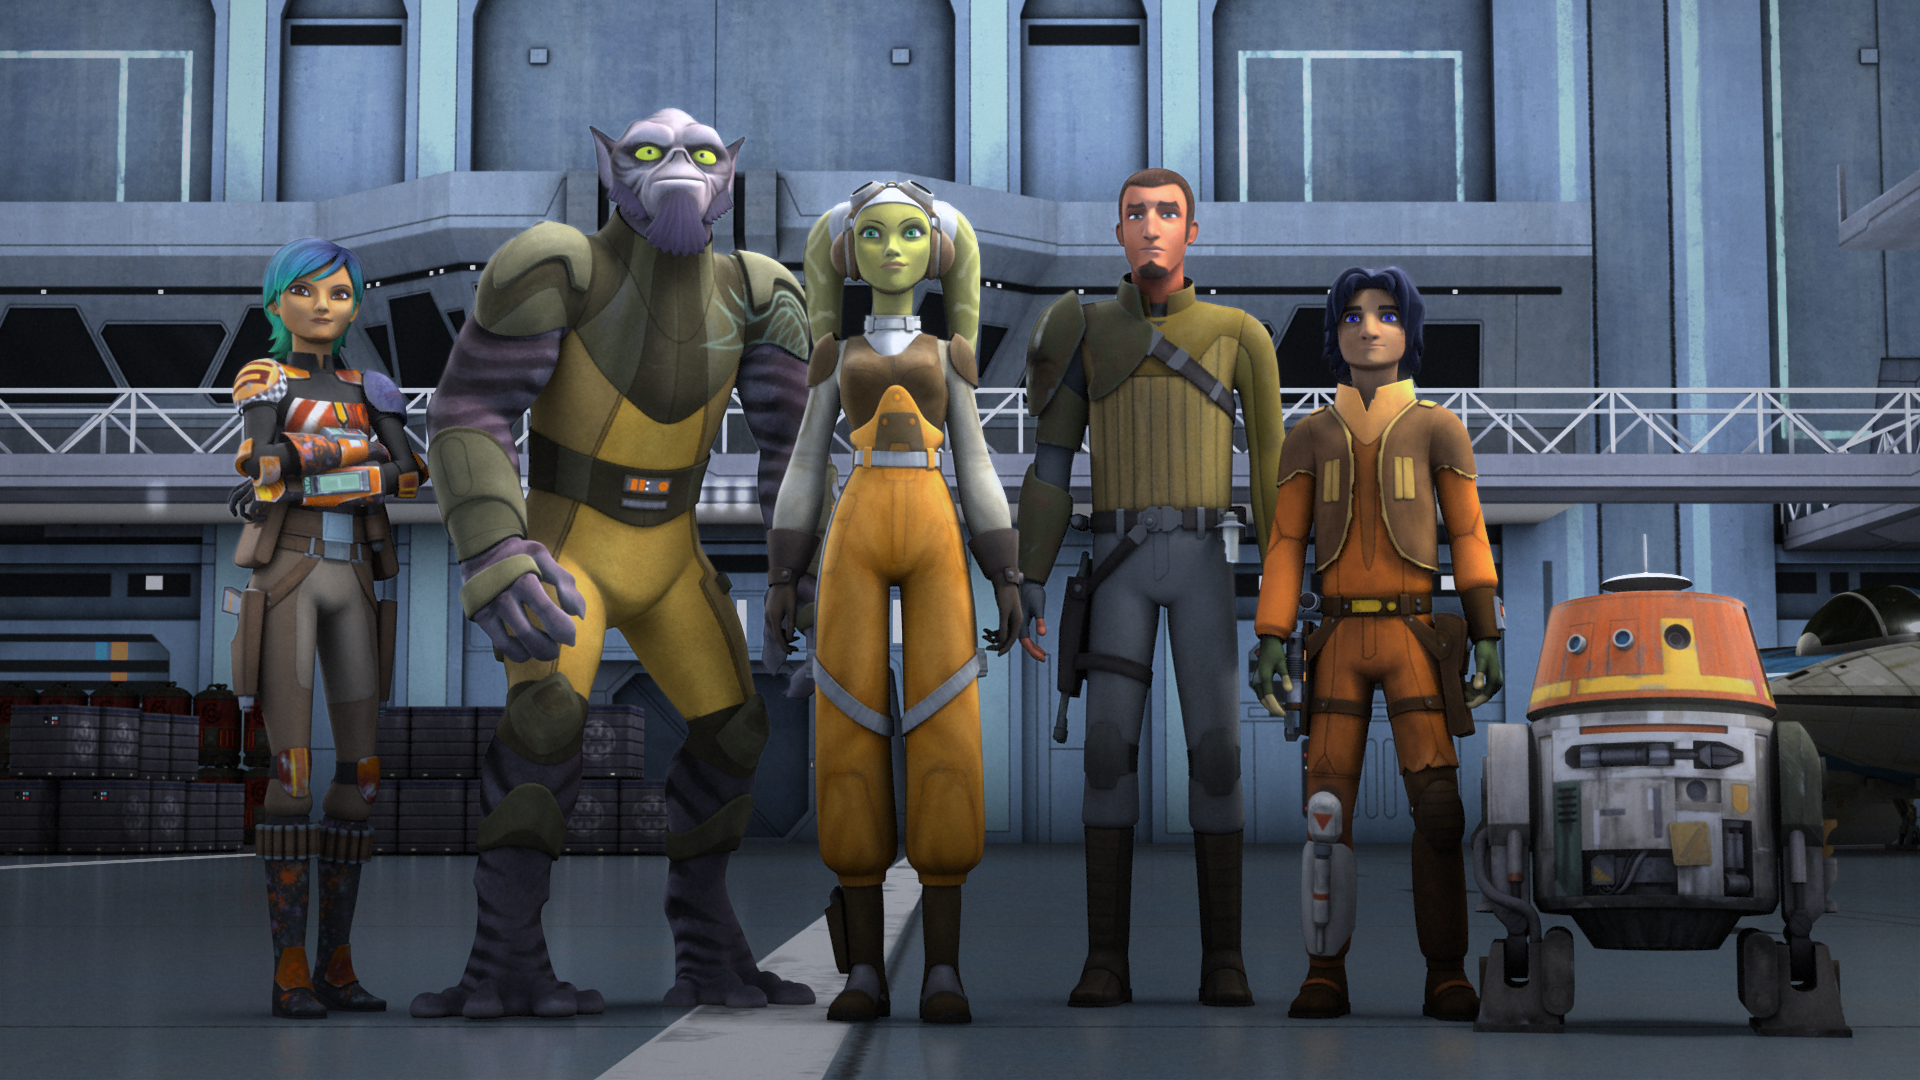 Which Jedi Master does the Ghost crew attempt to rescue, only to find it was a trap set by The Inquisitor?